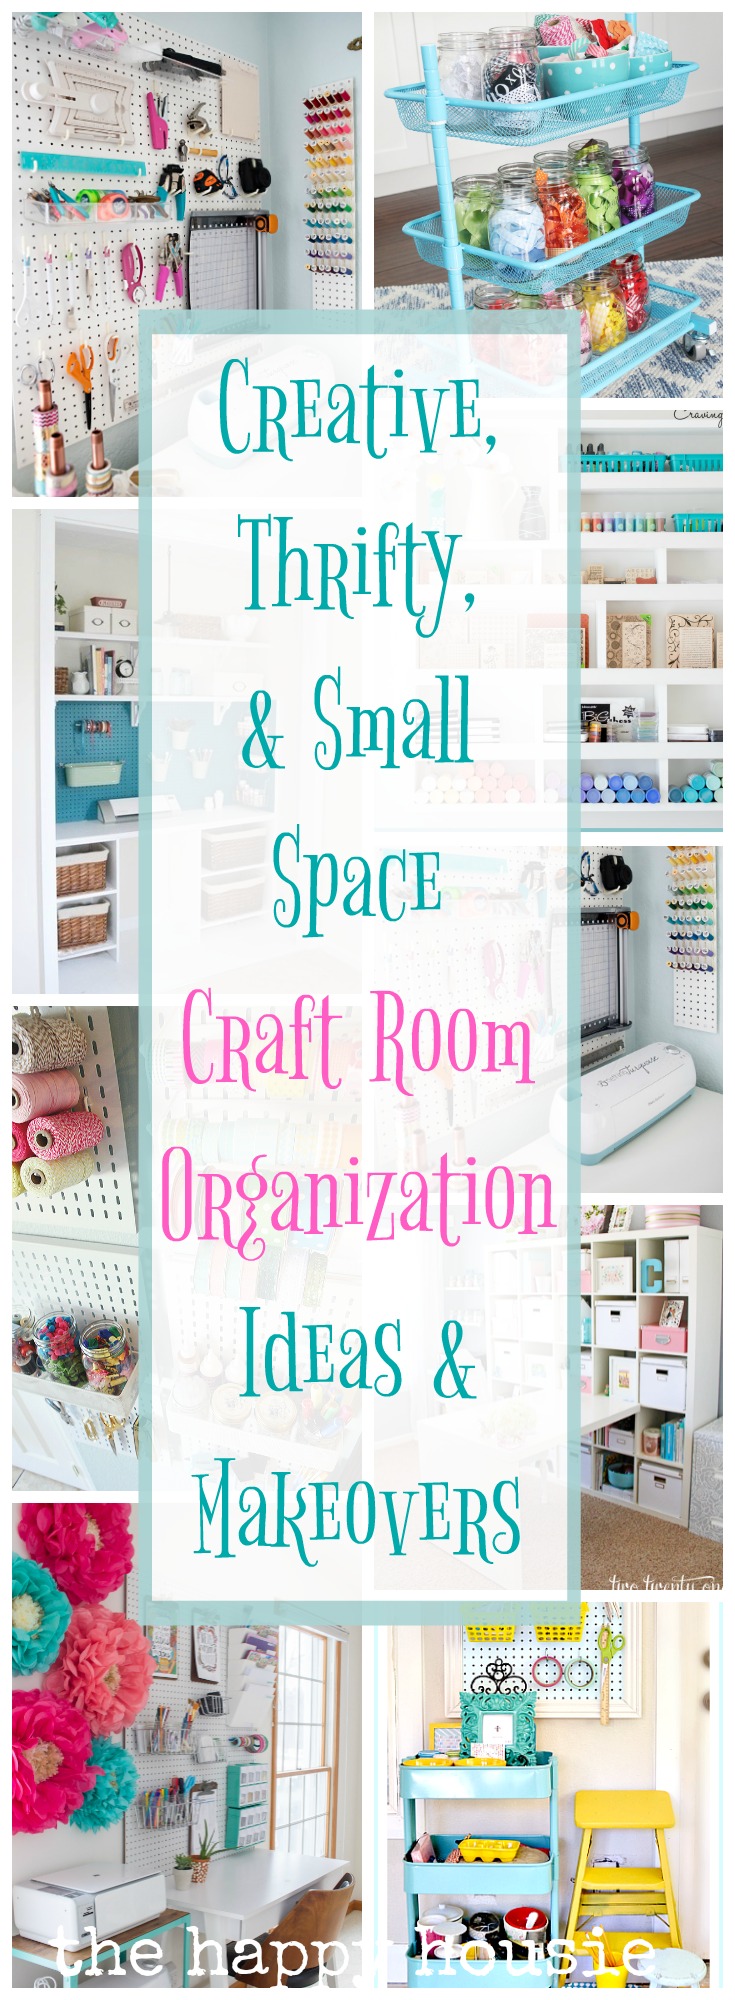 Creative, Thrifty, & Small Space Craft Room Organization ...